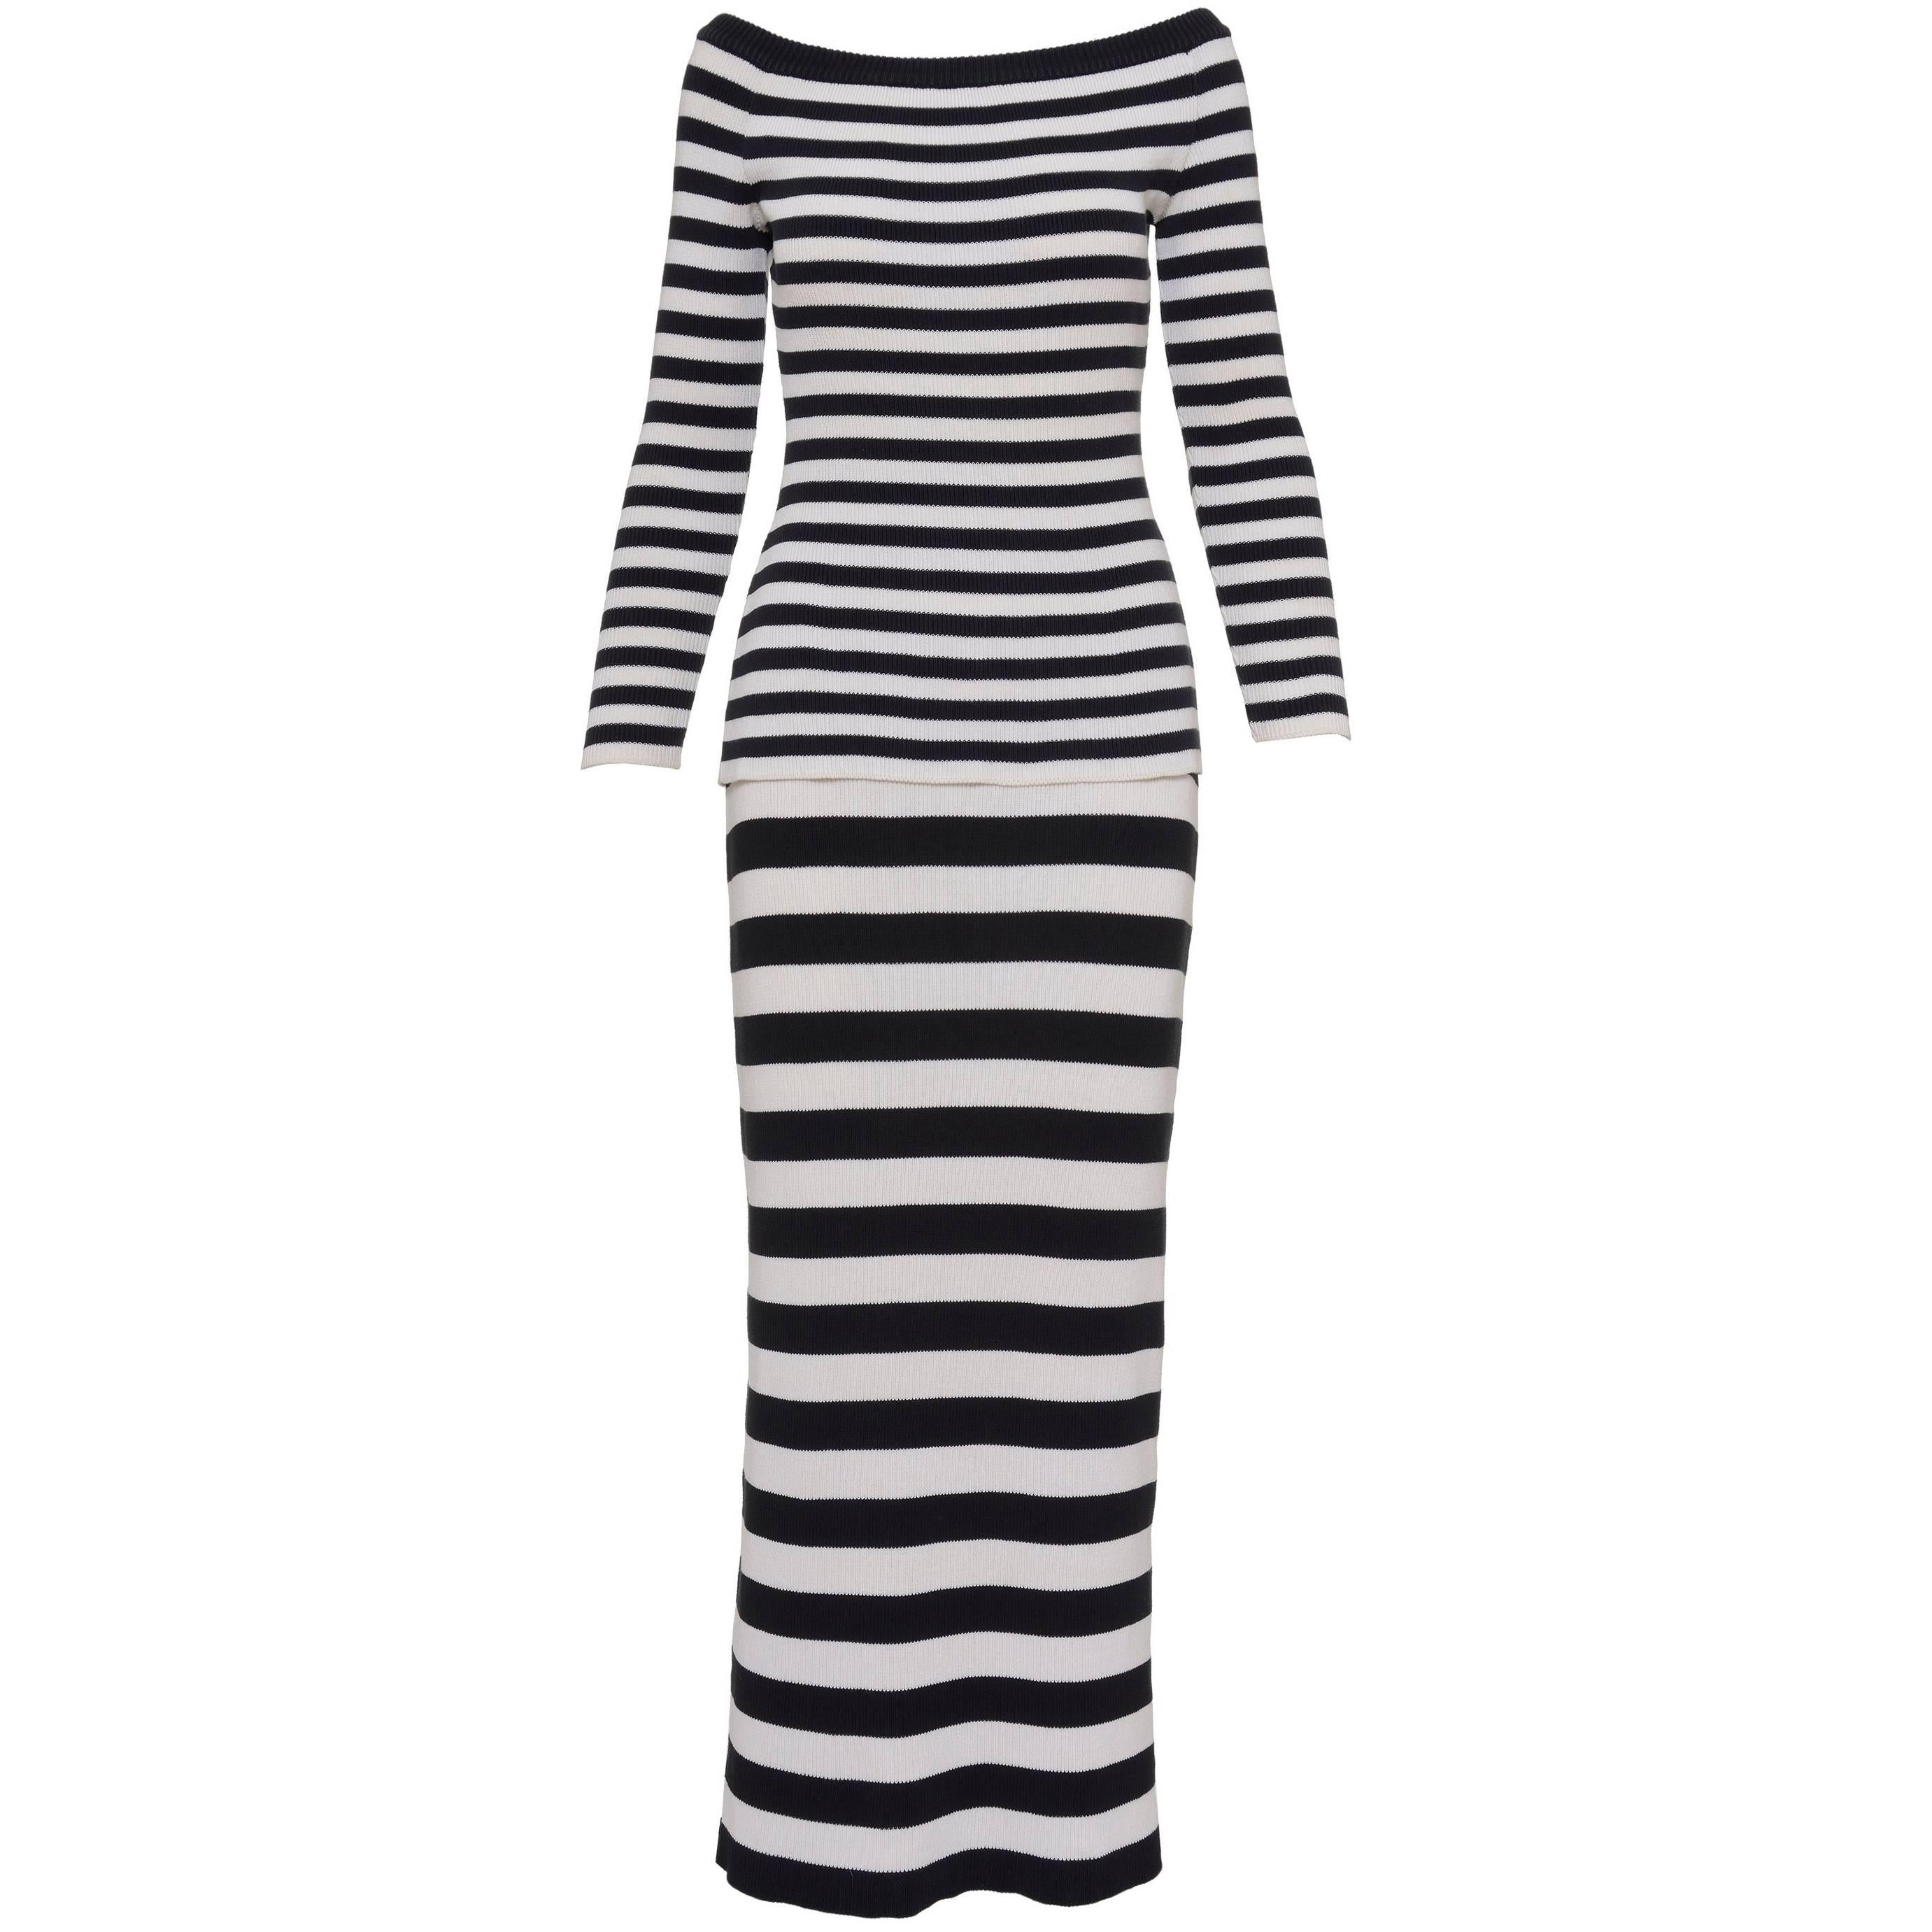 Salvatore Ferragamo Striped Black and White Jersey Sweater and Skirt For Sale